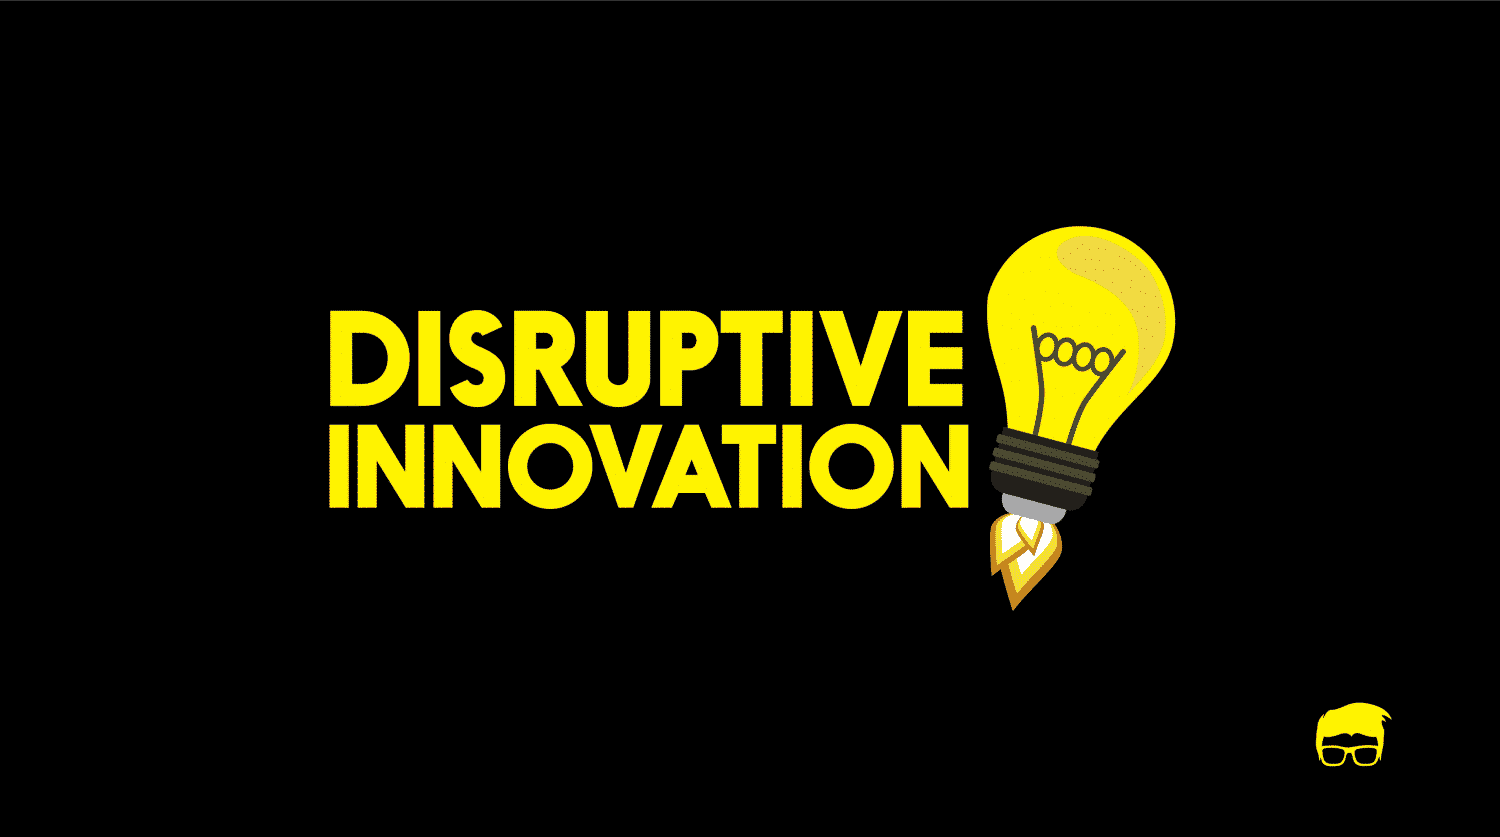 What Is Disruptive Innovation?